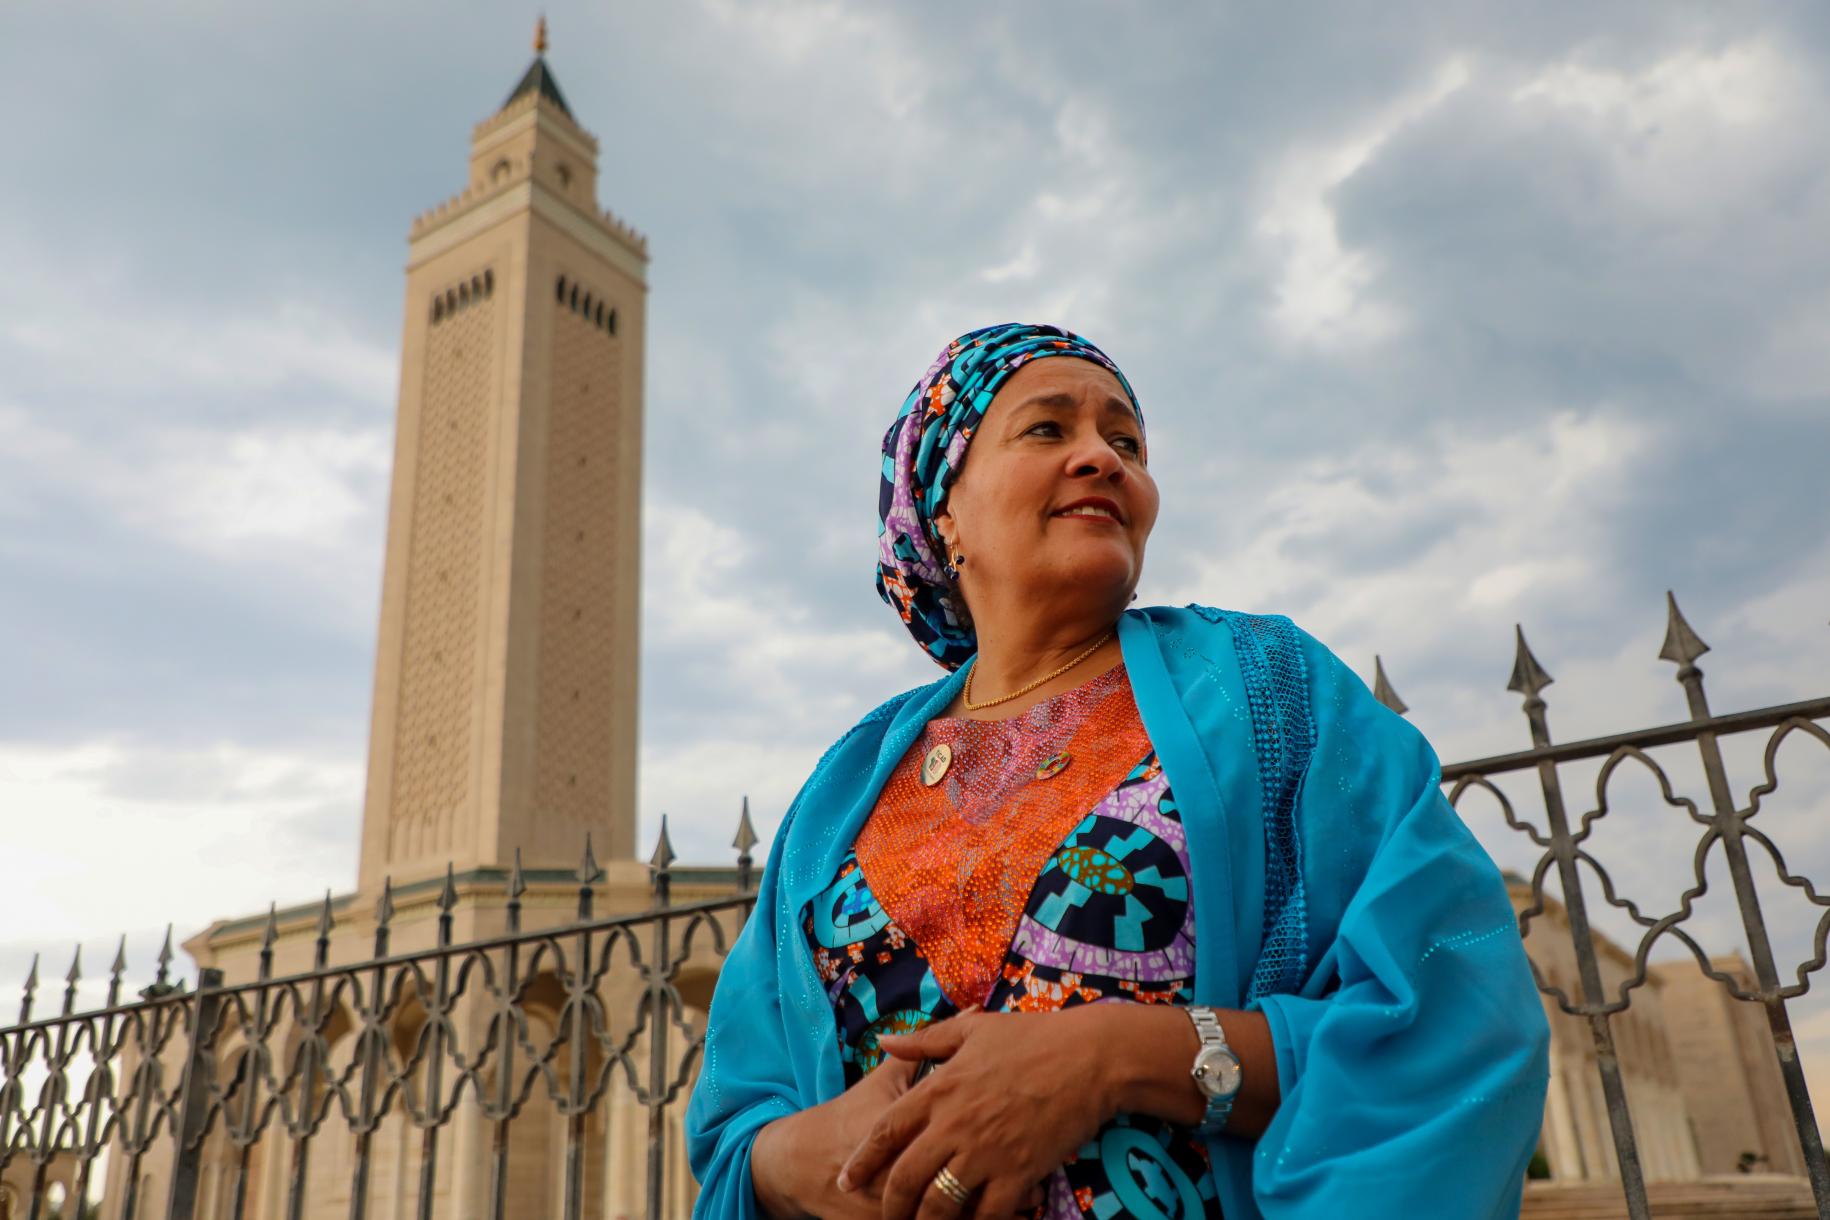 The United Nations Deputy Secretary-General Amina J. Mohammed seized the opportunity of her attending the eighth edition of the Tokyo International Conference on African Development (TICAD 8) held on 27 and 28 August 2022 in Tunis, Tunisia, to visit the world-renowned Punic capital of Carthage, in the outskirts of Tunis, where she stopped at the Mâlik ibn Anas Mosque in the immediate vicinity of the Damous El Karita Basilica.